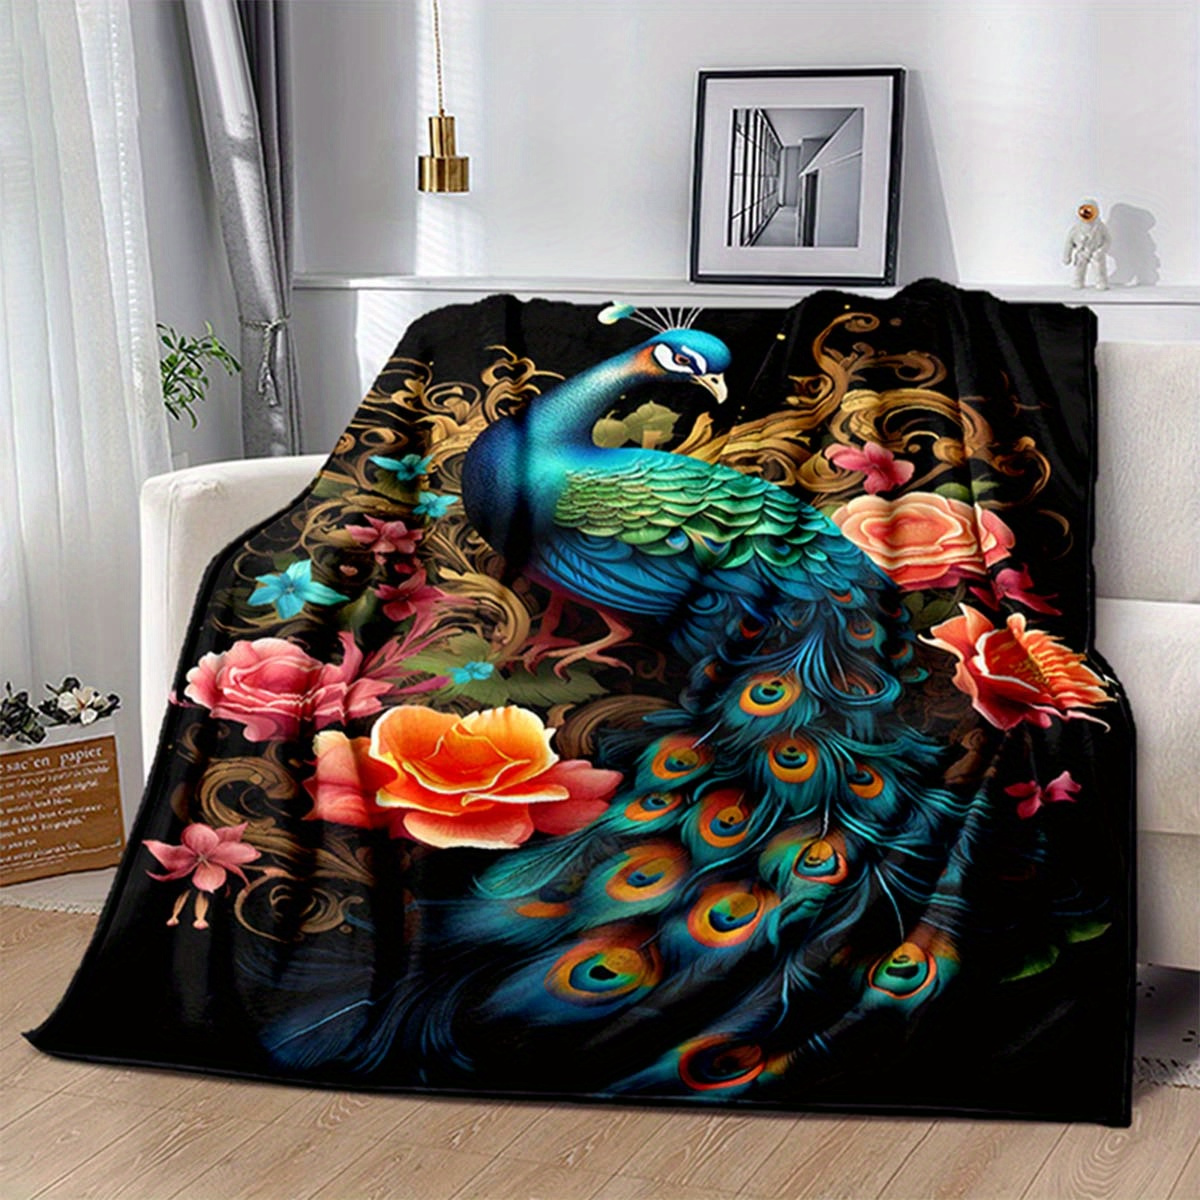 1pc Peacock Soft Flannel Throw Blanket For Living Room Bedroom Bed Sofa Picnic Cover Decor Napping Couch Chair Cover For Car